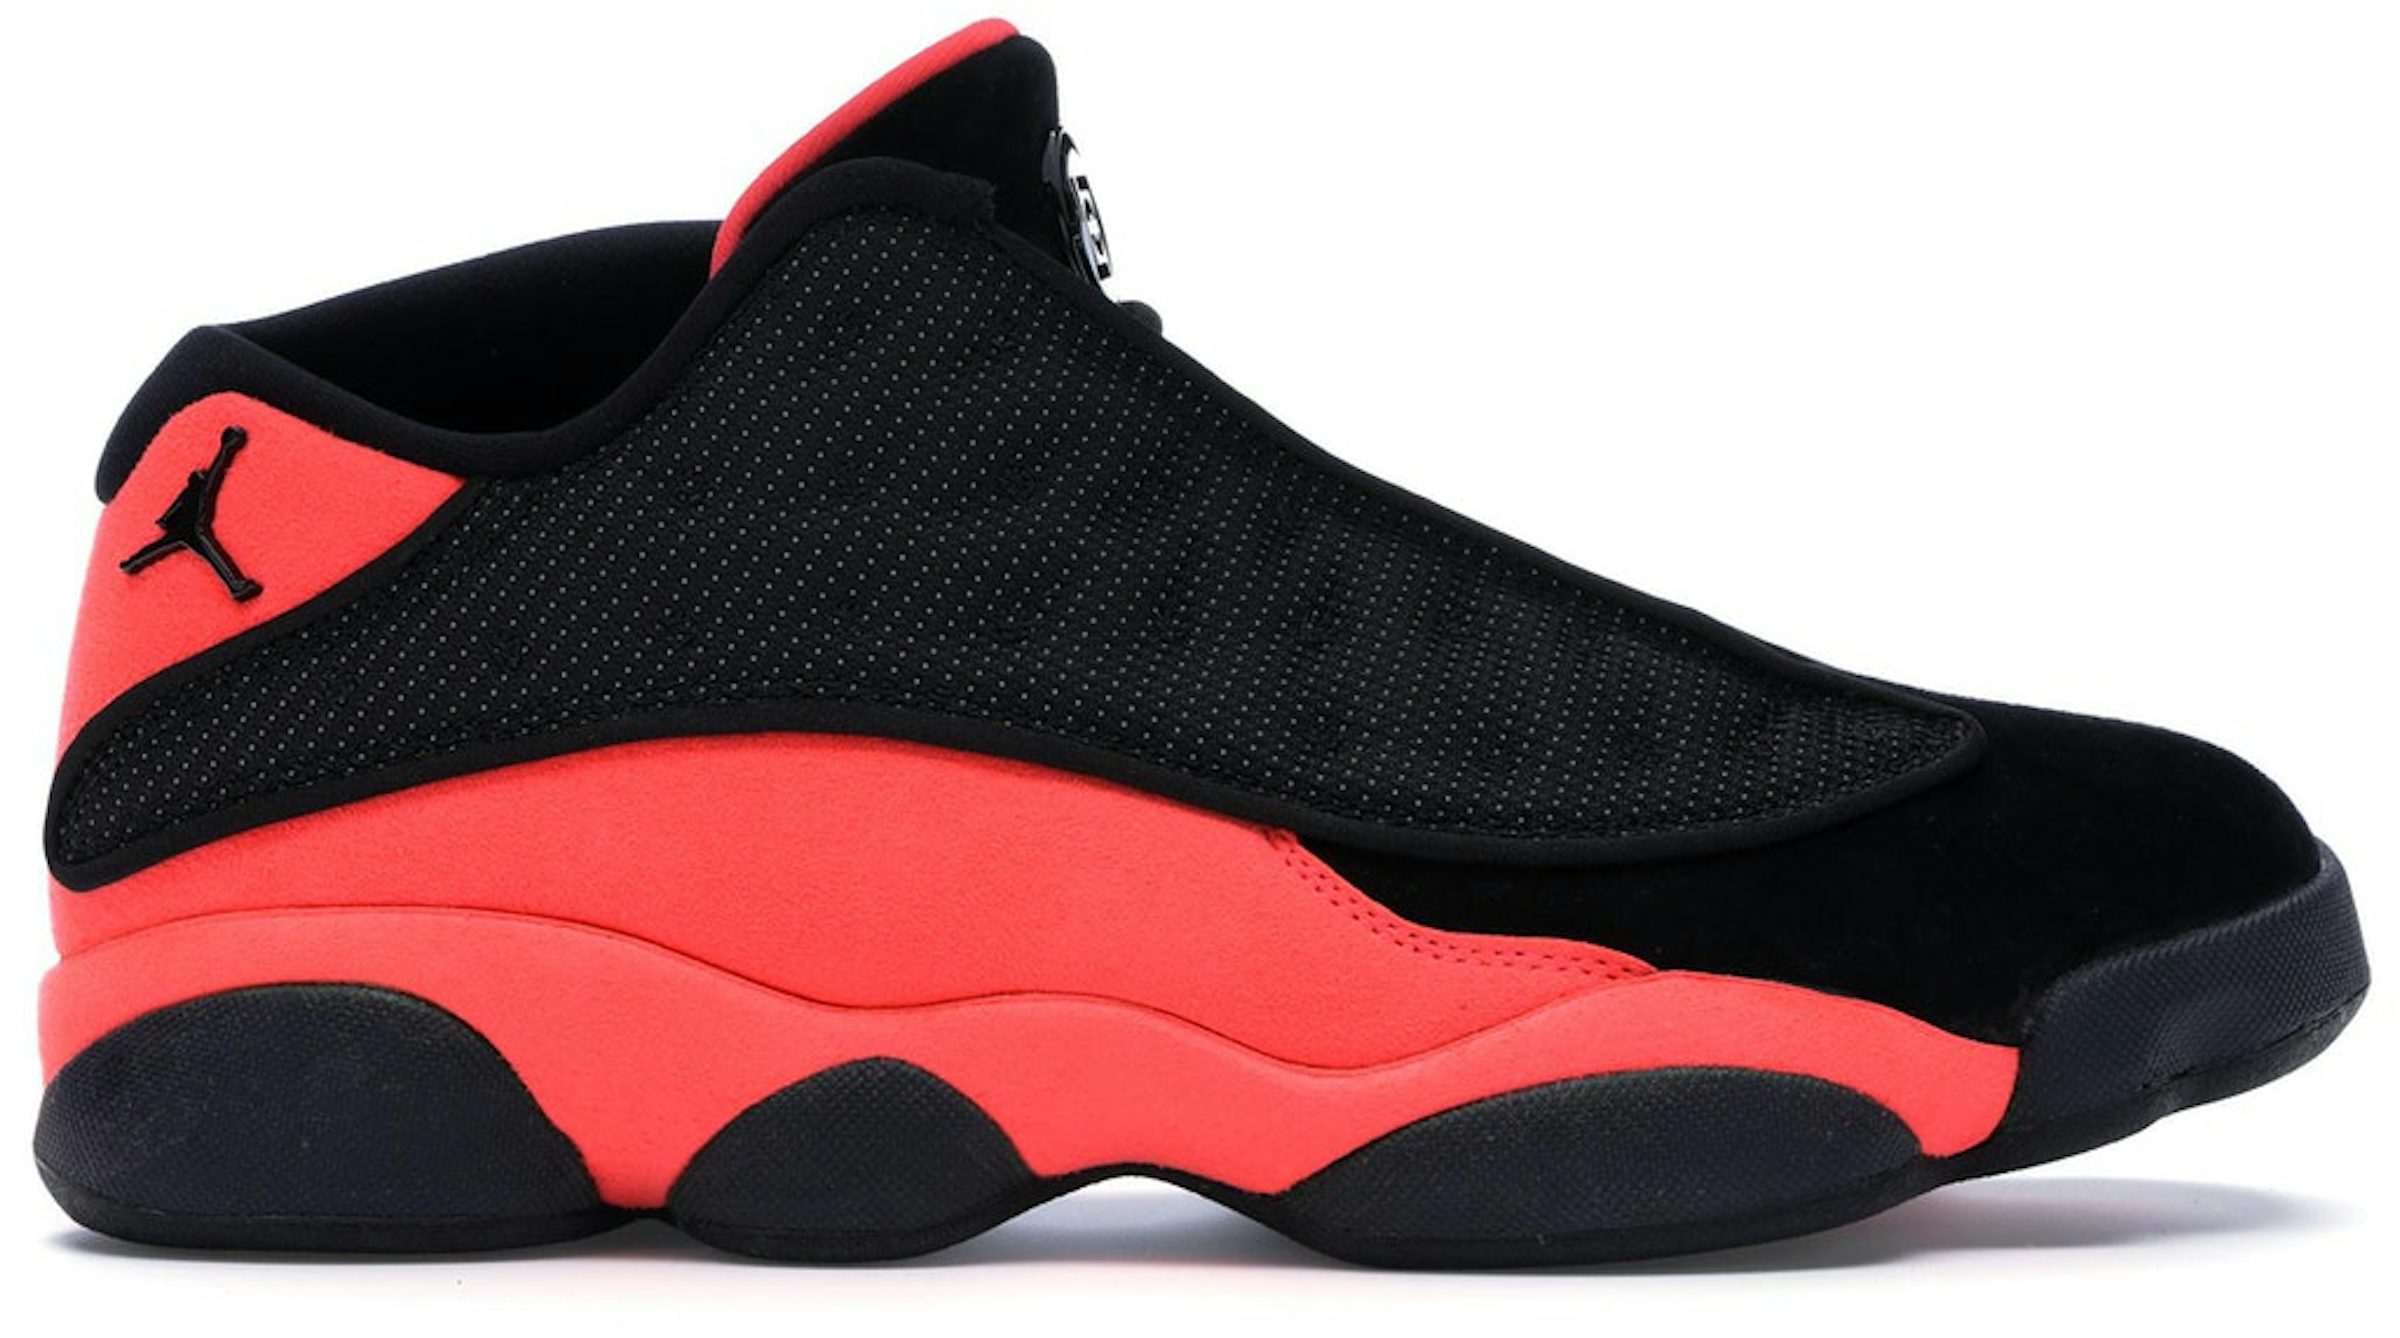 All About the Jordan Retro 13 Red and Black Colorways